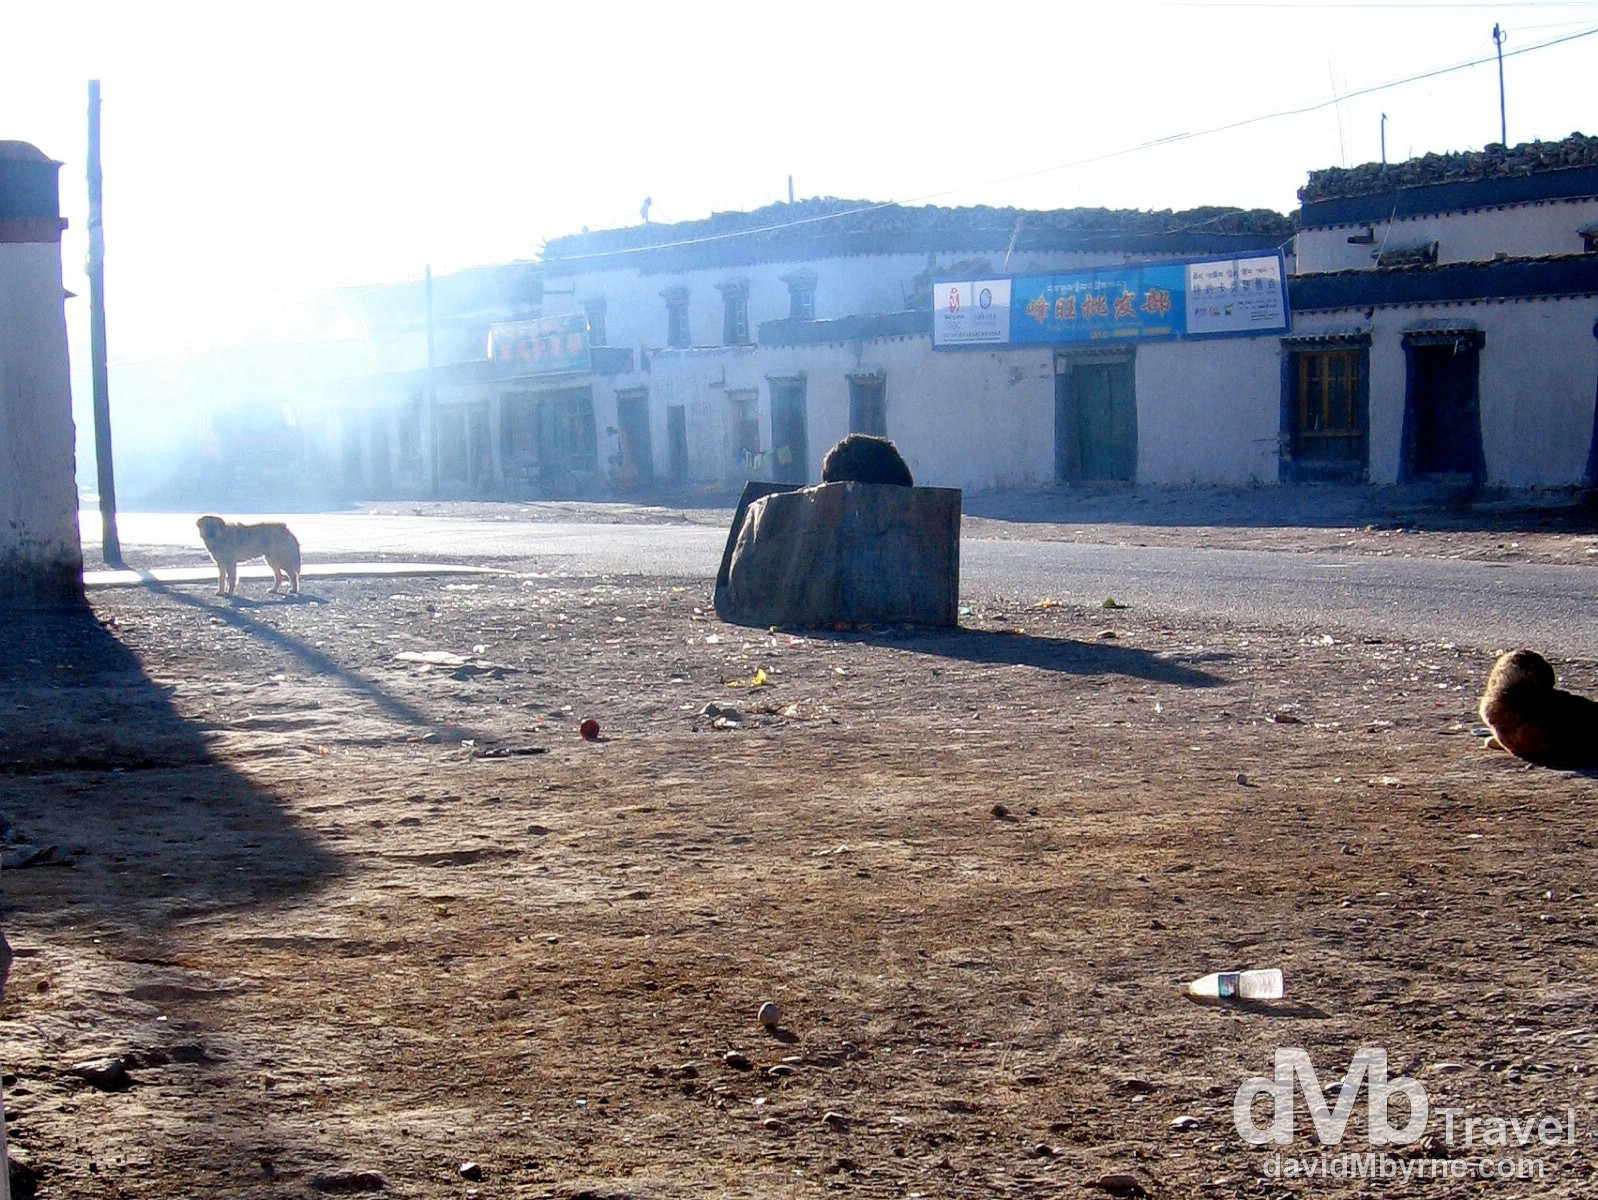 Early morning in Tingri on the Friendship Highway in Tibet. March 3rd 2008